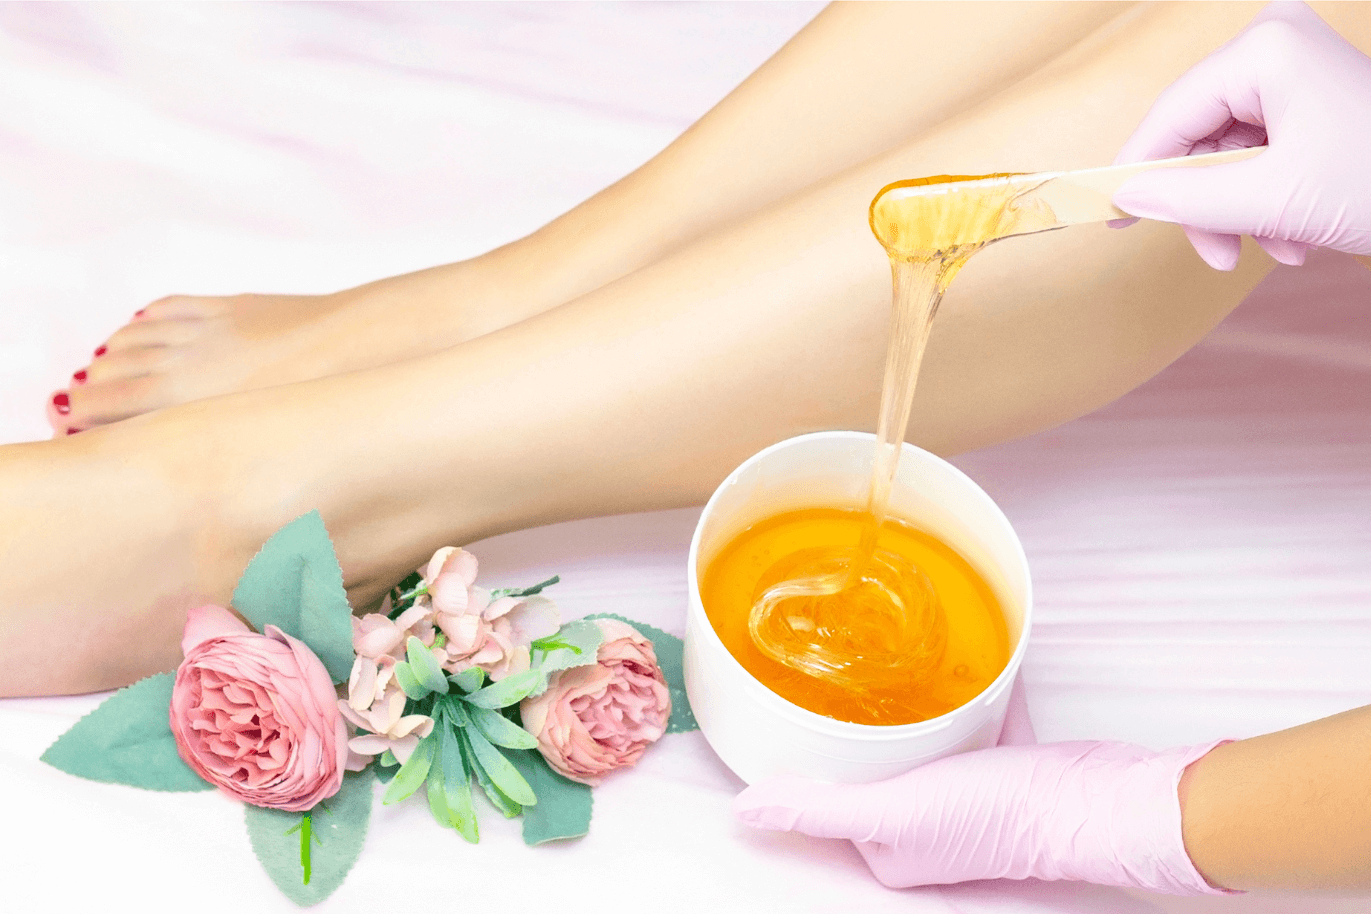 Hair Removal Waxing Near Me - Waxing Locations Near Me - Body Waxing Fort Collins